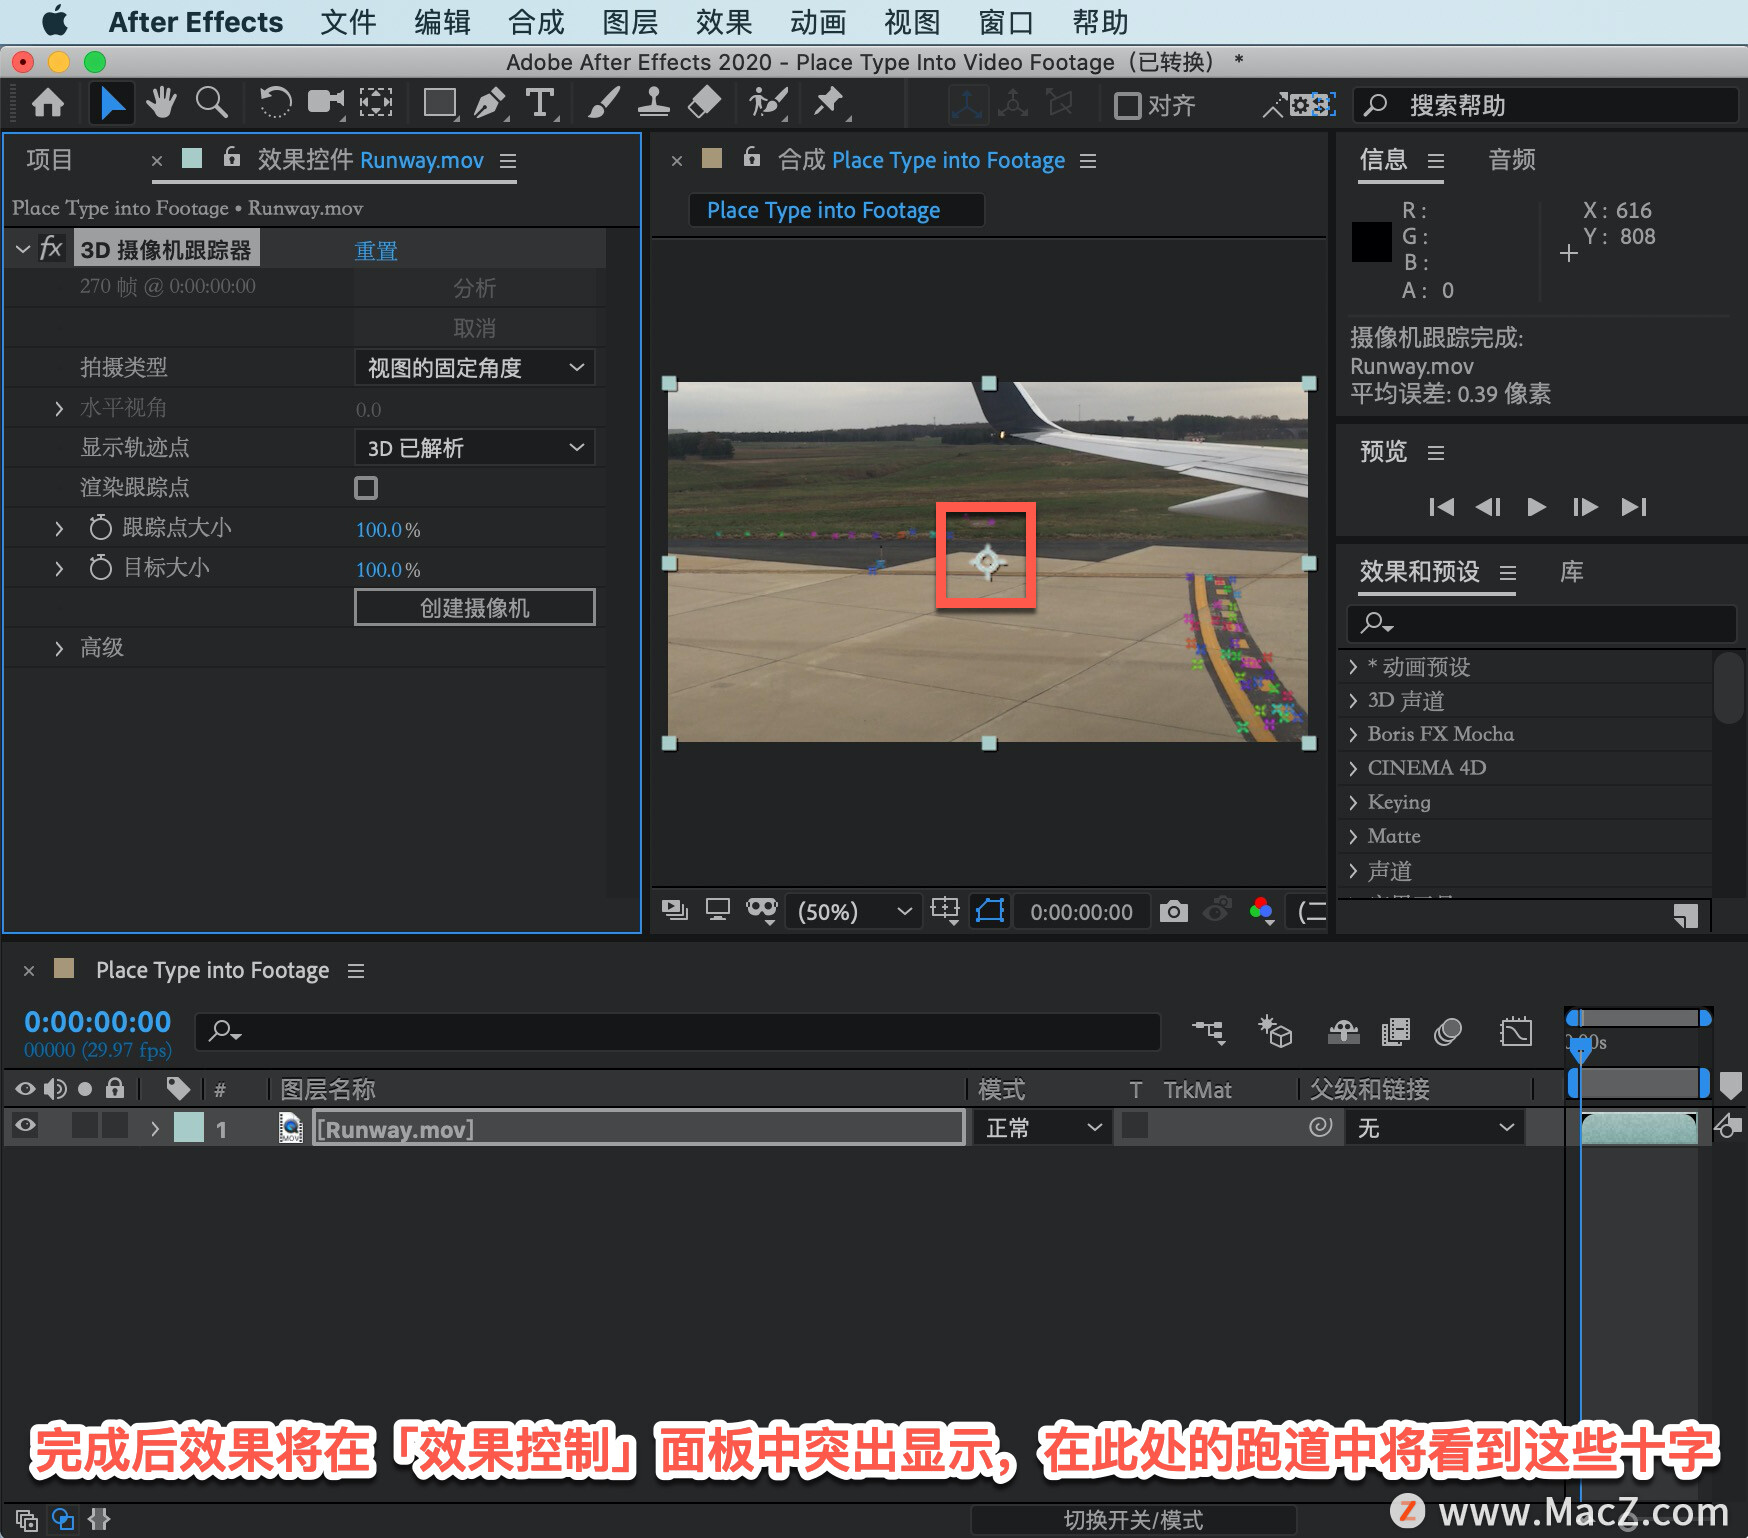 After Effects 教程「31」，如何在 After Effects 中使用3D 摄像机跟踪器效果？